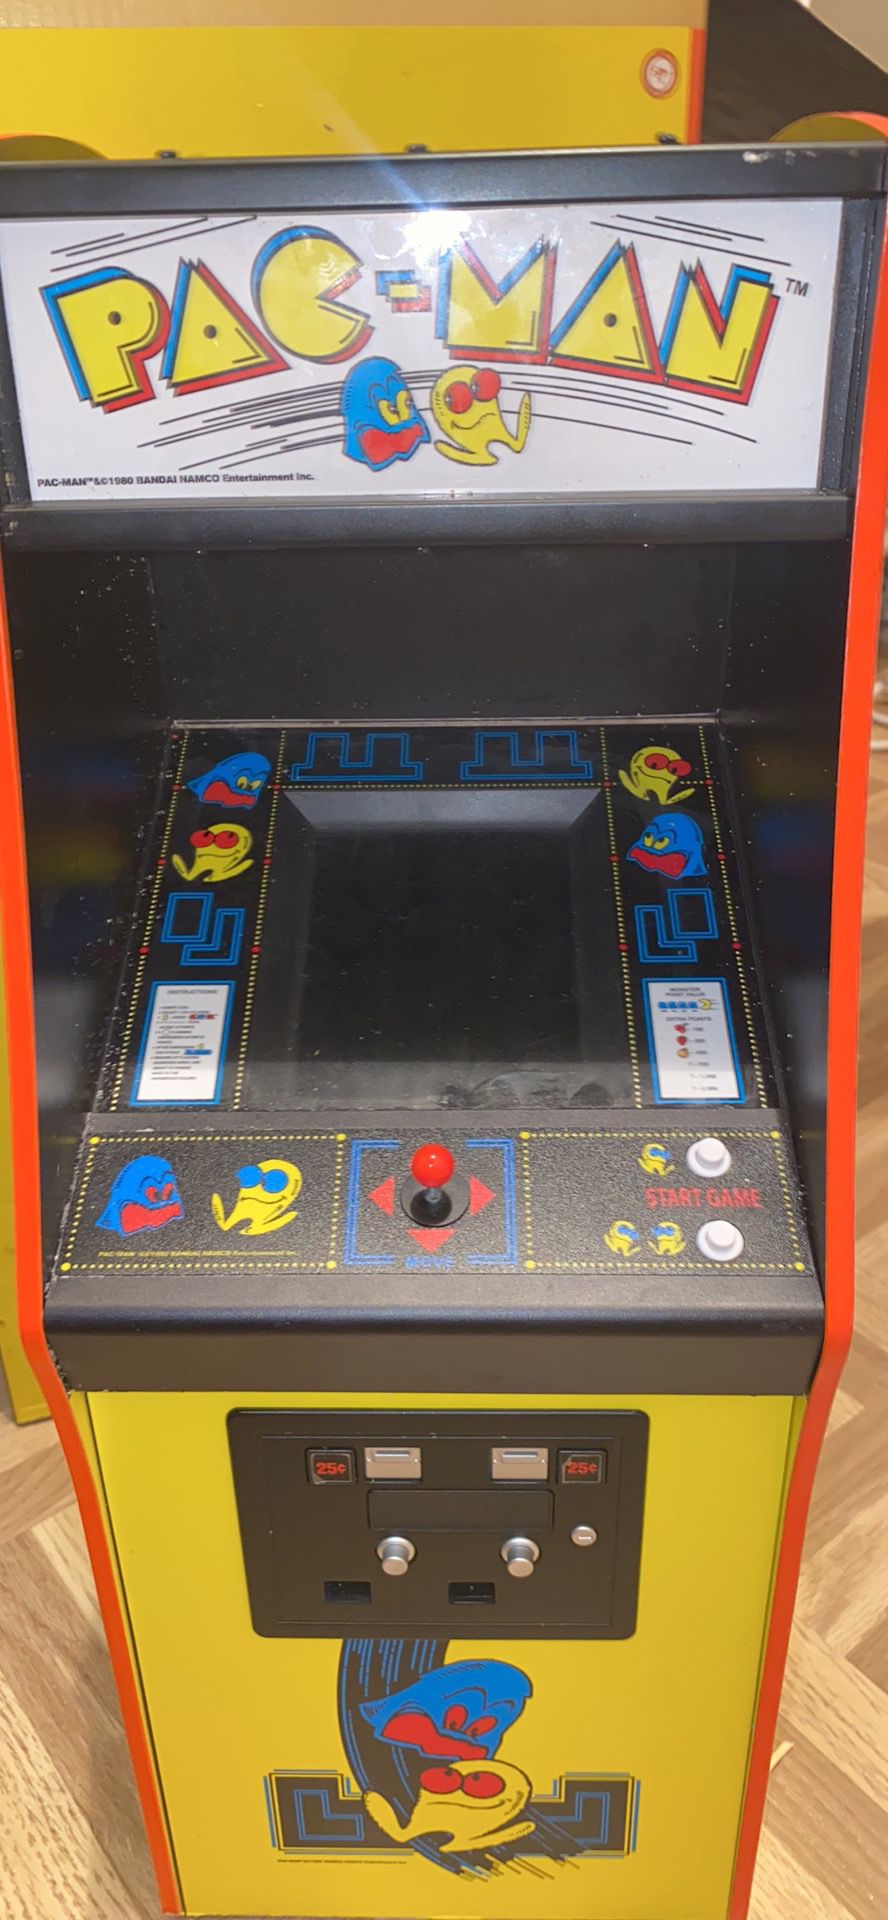 Pac-Man arcade game real life size